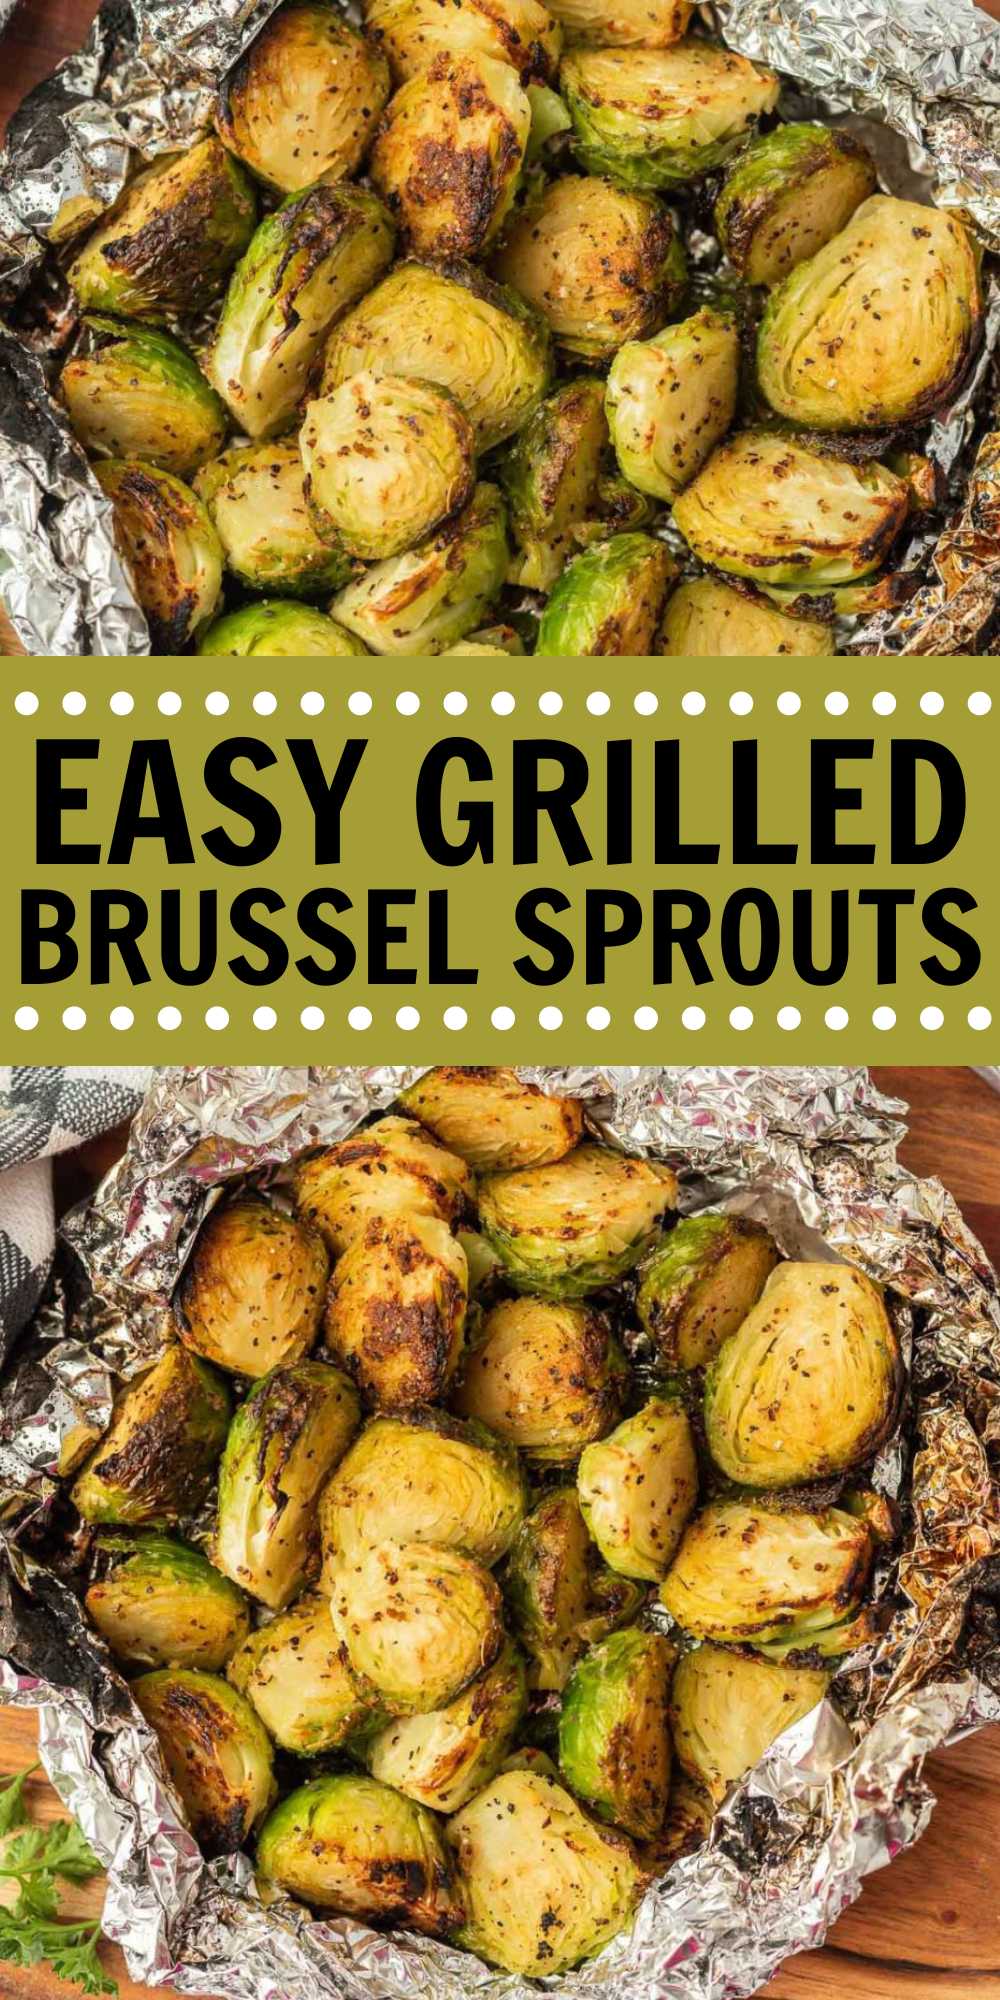 The texture of Grilled Brussel Sprouts in foil is amazing. They are so tender and perfectly seasoned. Each bite is delicious. They make a great side dish with hardly any effort. With just a simple seasoning blend, this recipe has amazing flavor. #eatingonadime #grilledbrusselsproutsinfoil #foilpackbrusselsprouts #grilledbrusselsprouts